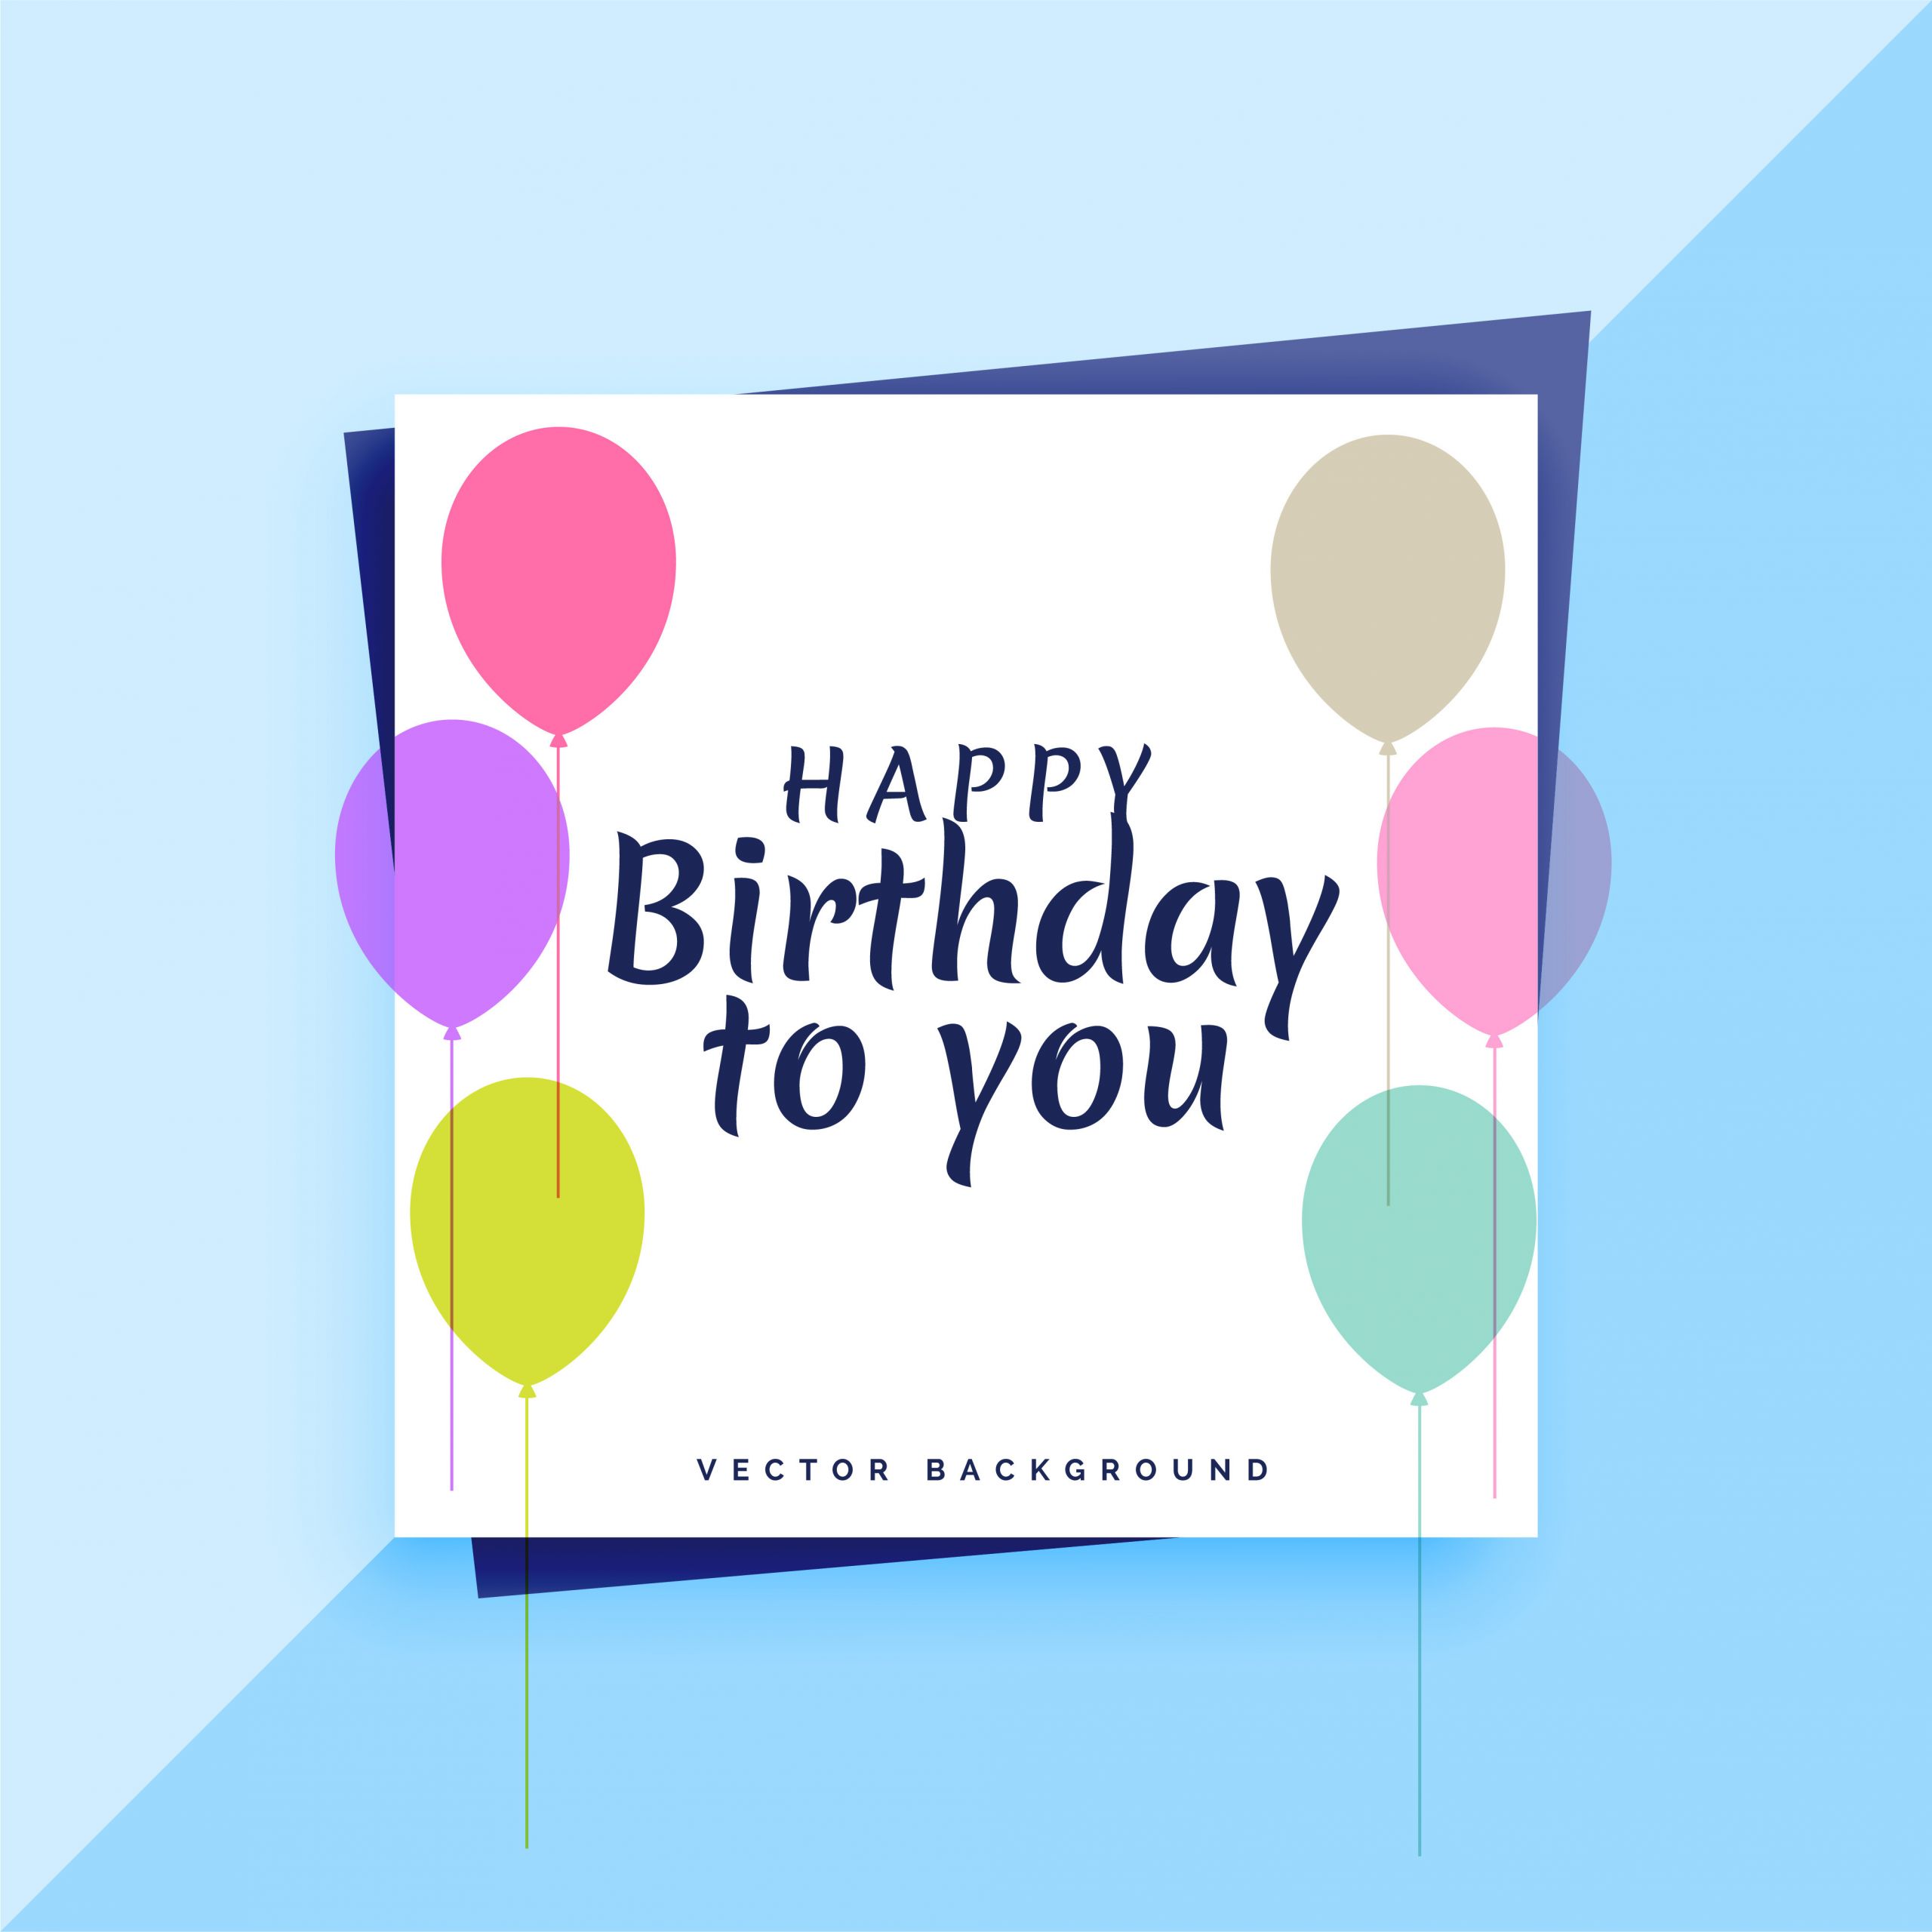 Design A Birthday Card
 elegant happy birthday card design with colorful balloons